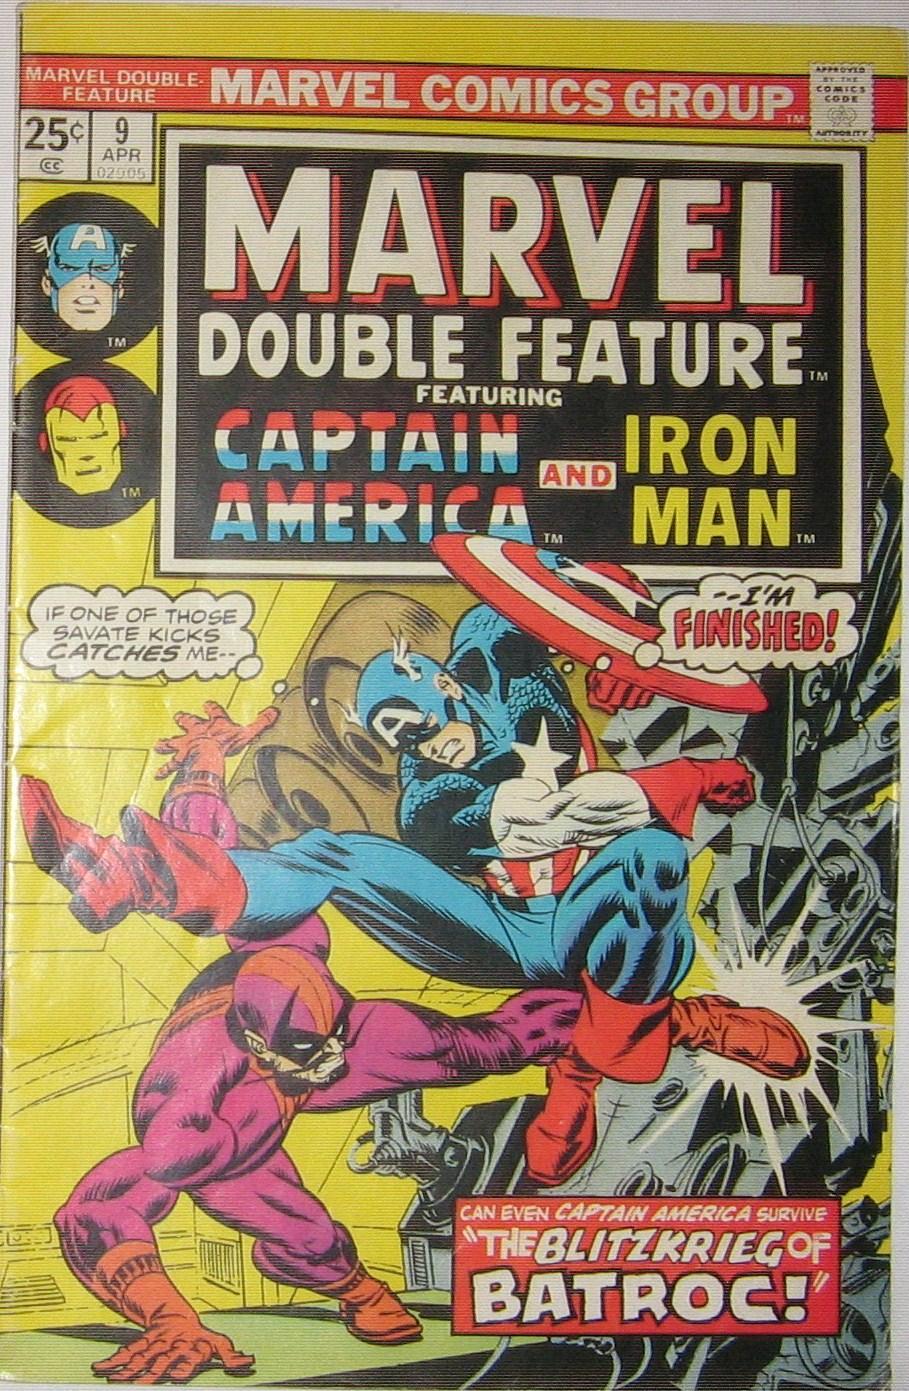 Marvel Double Feature Vol. 1 #9